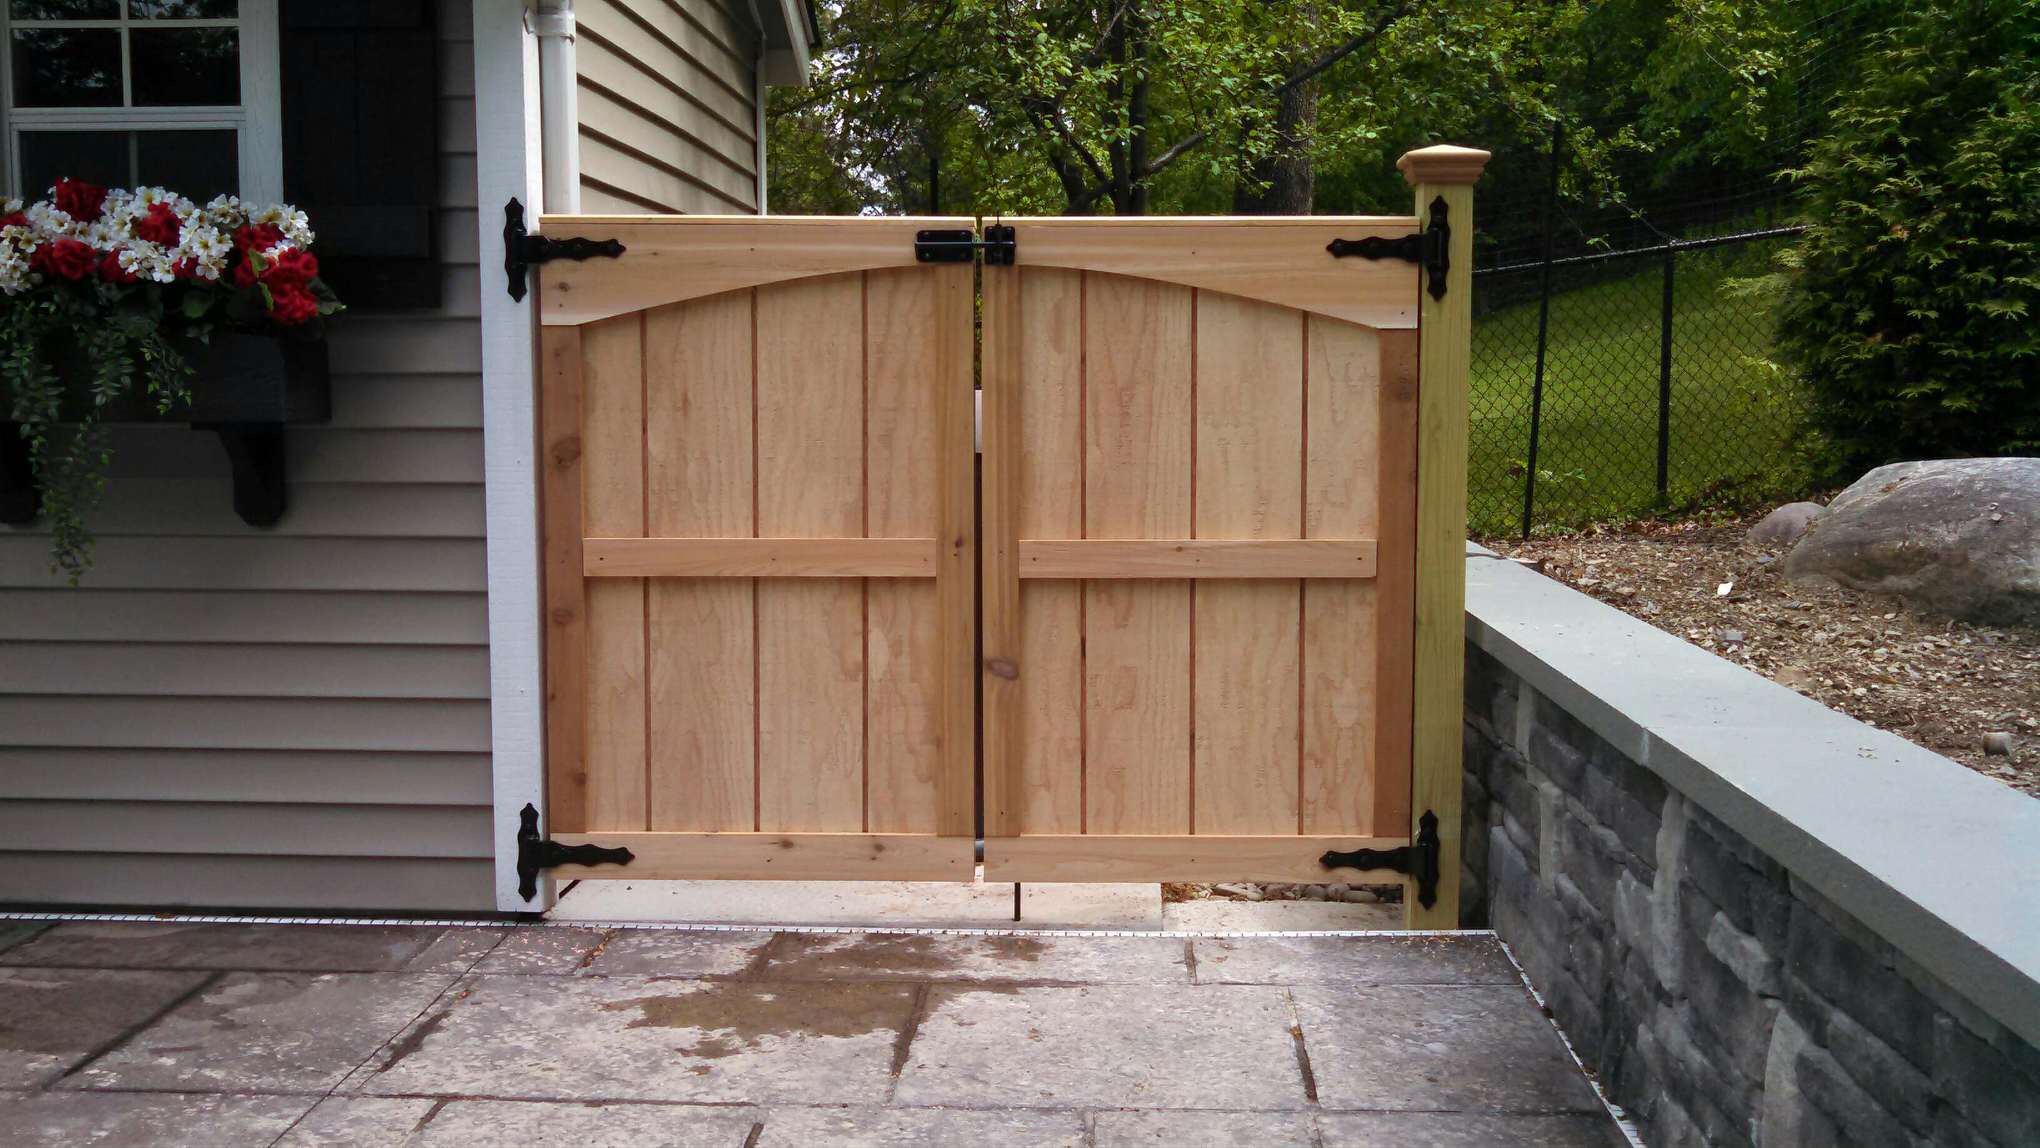 Custom Gate (designed to match shed door) – Before and After